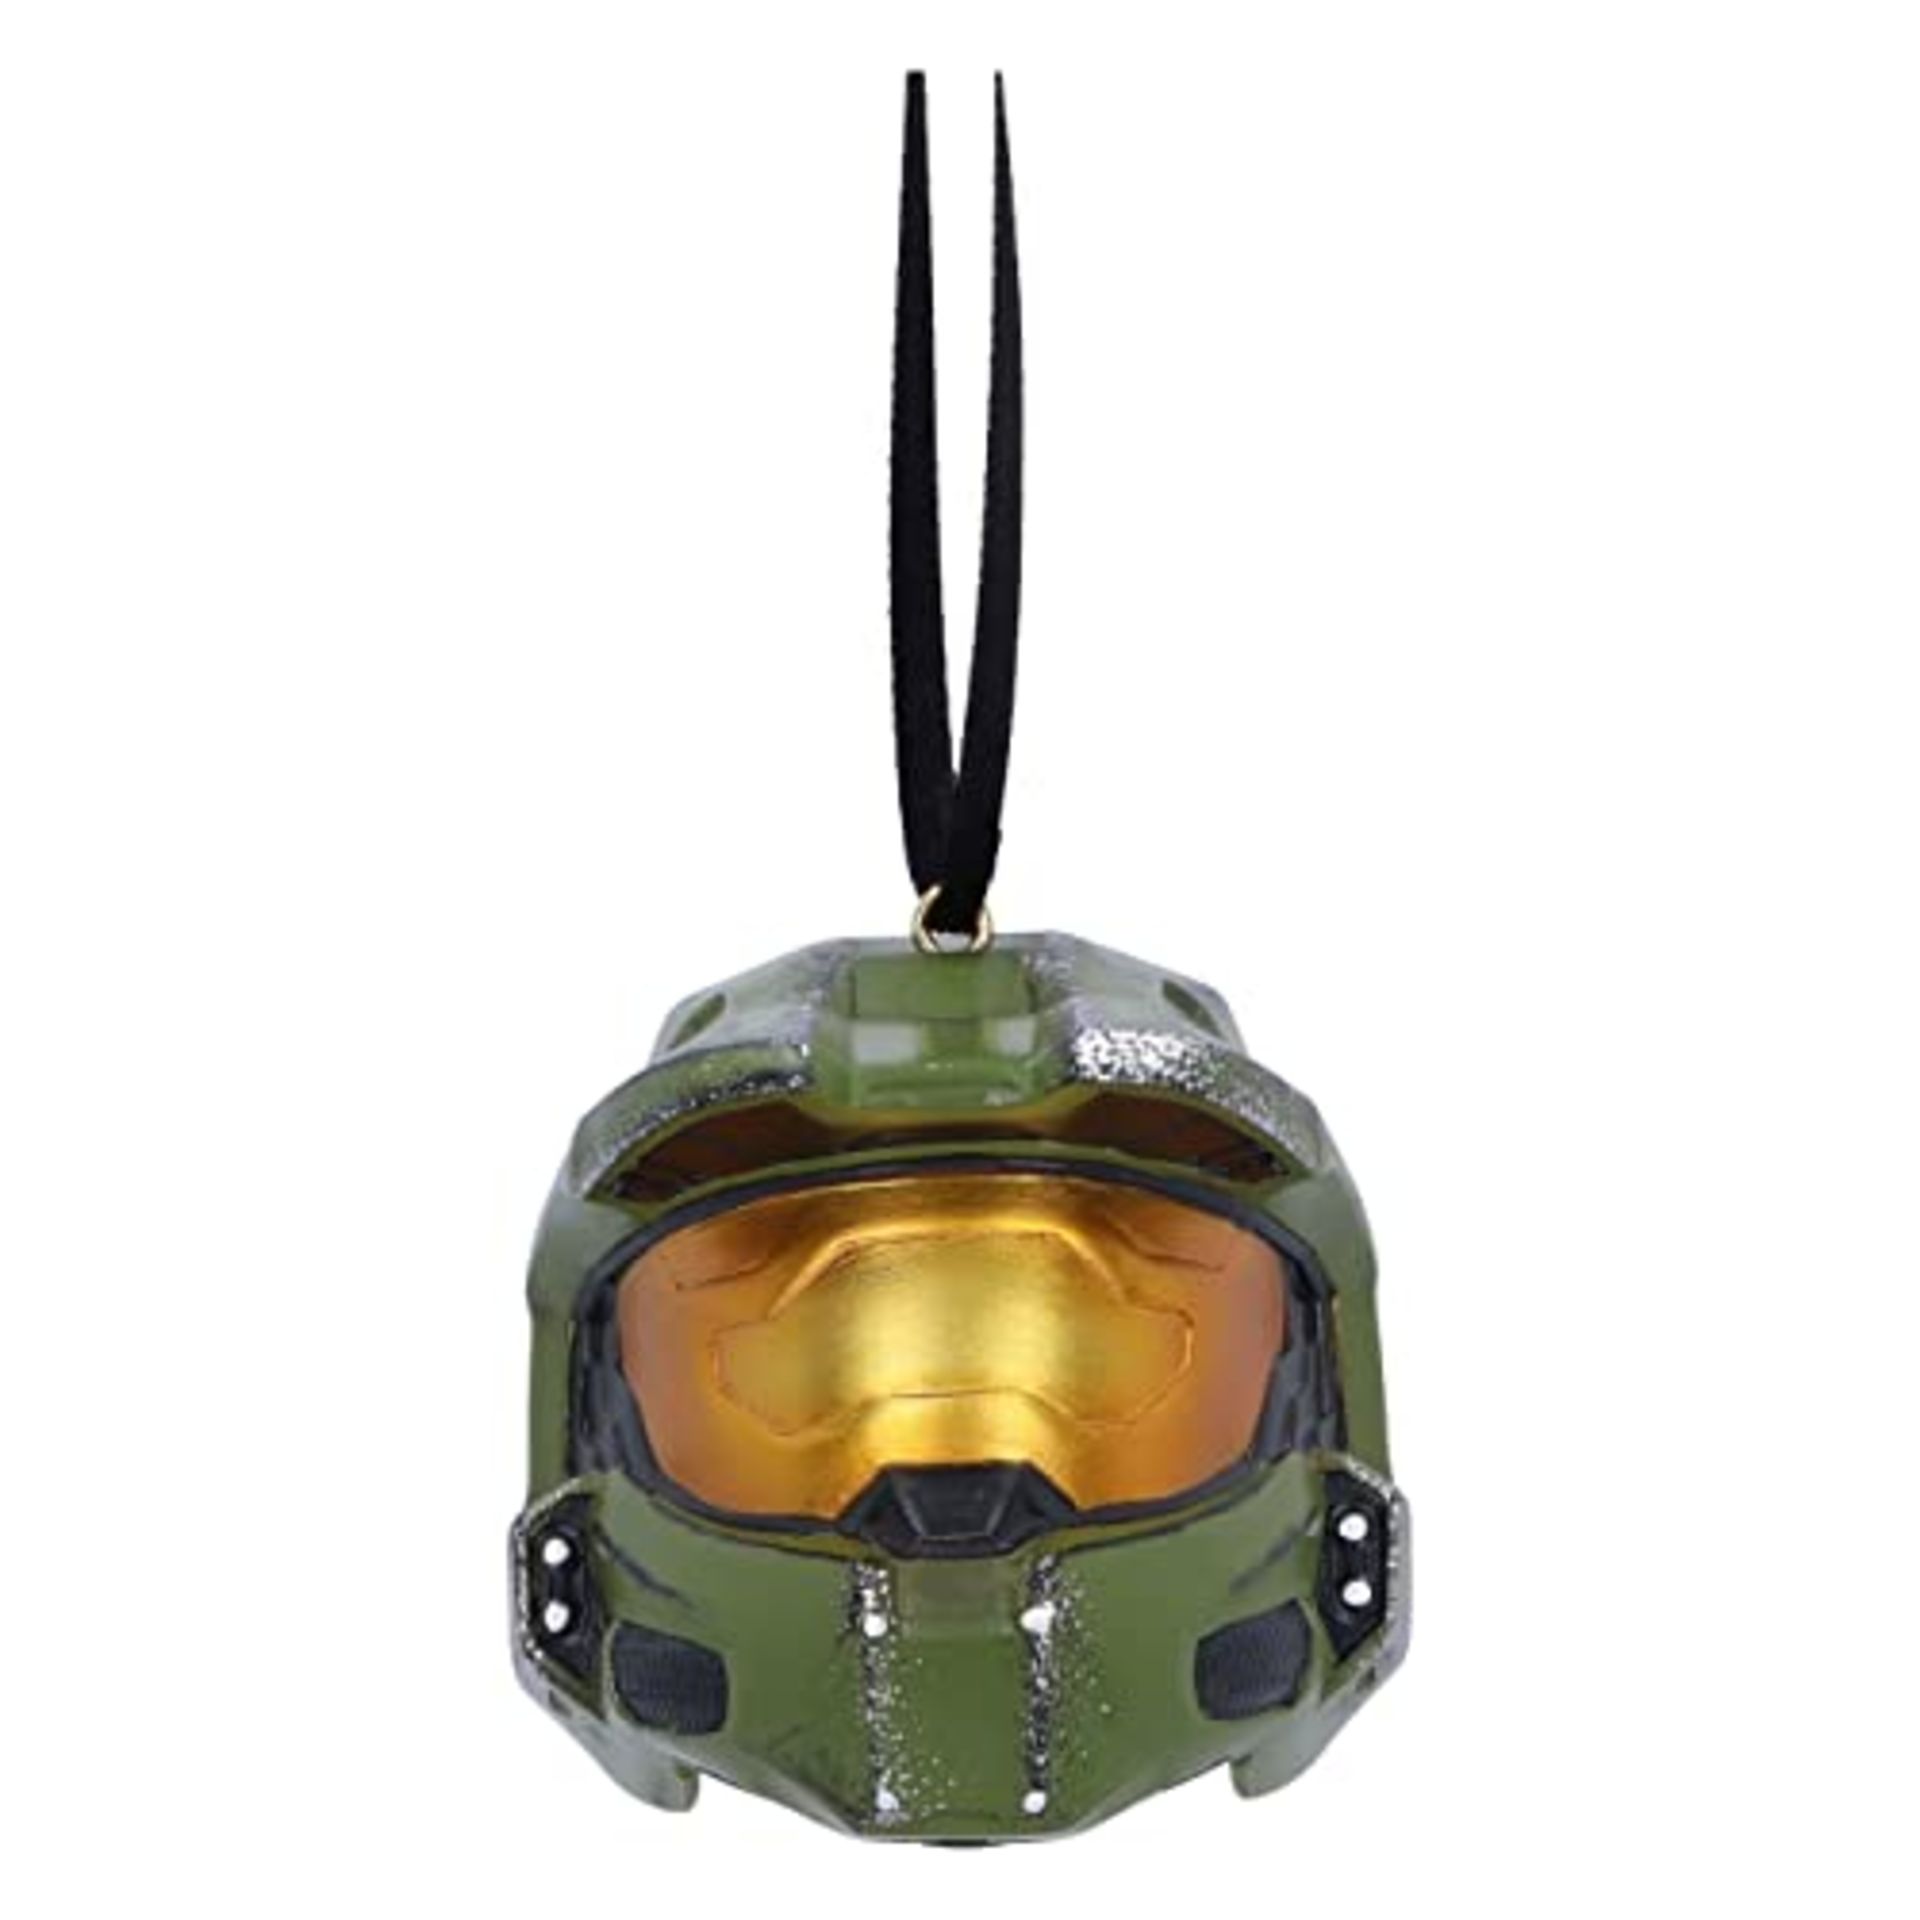 Nemesis Now Halo Master Chief Helmet Hanging Ornament 7.5cm, Resin, Officially License